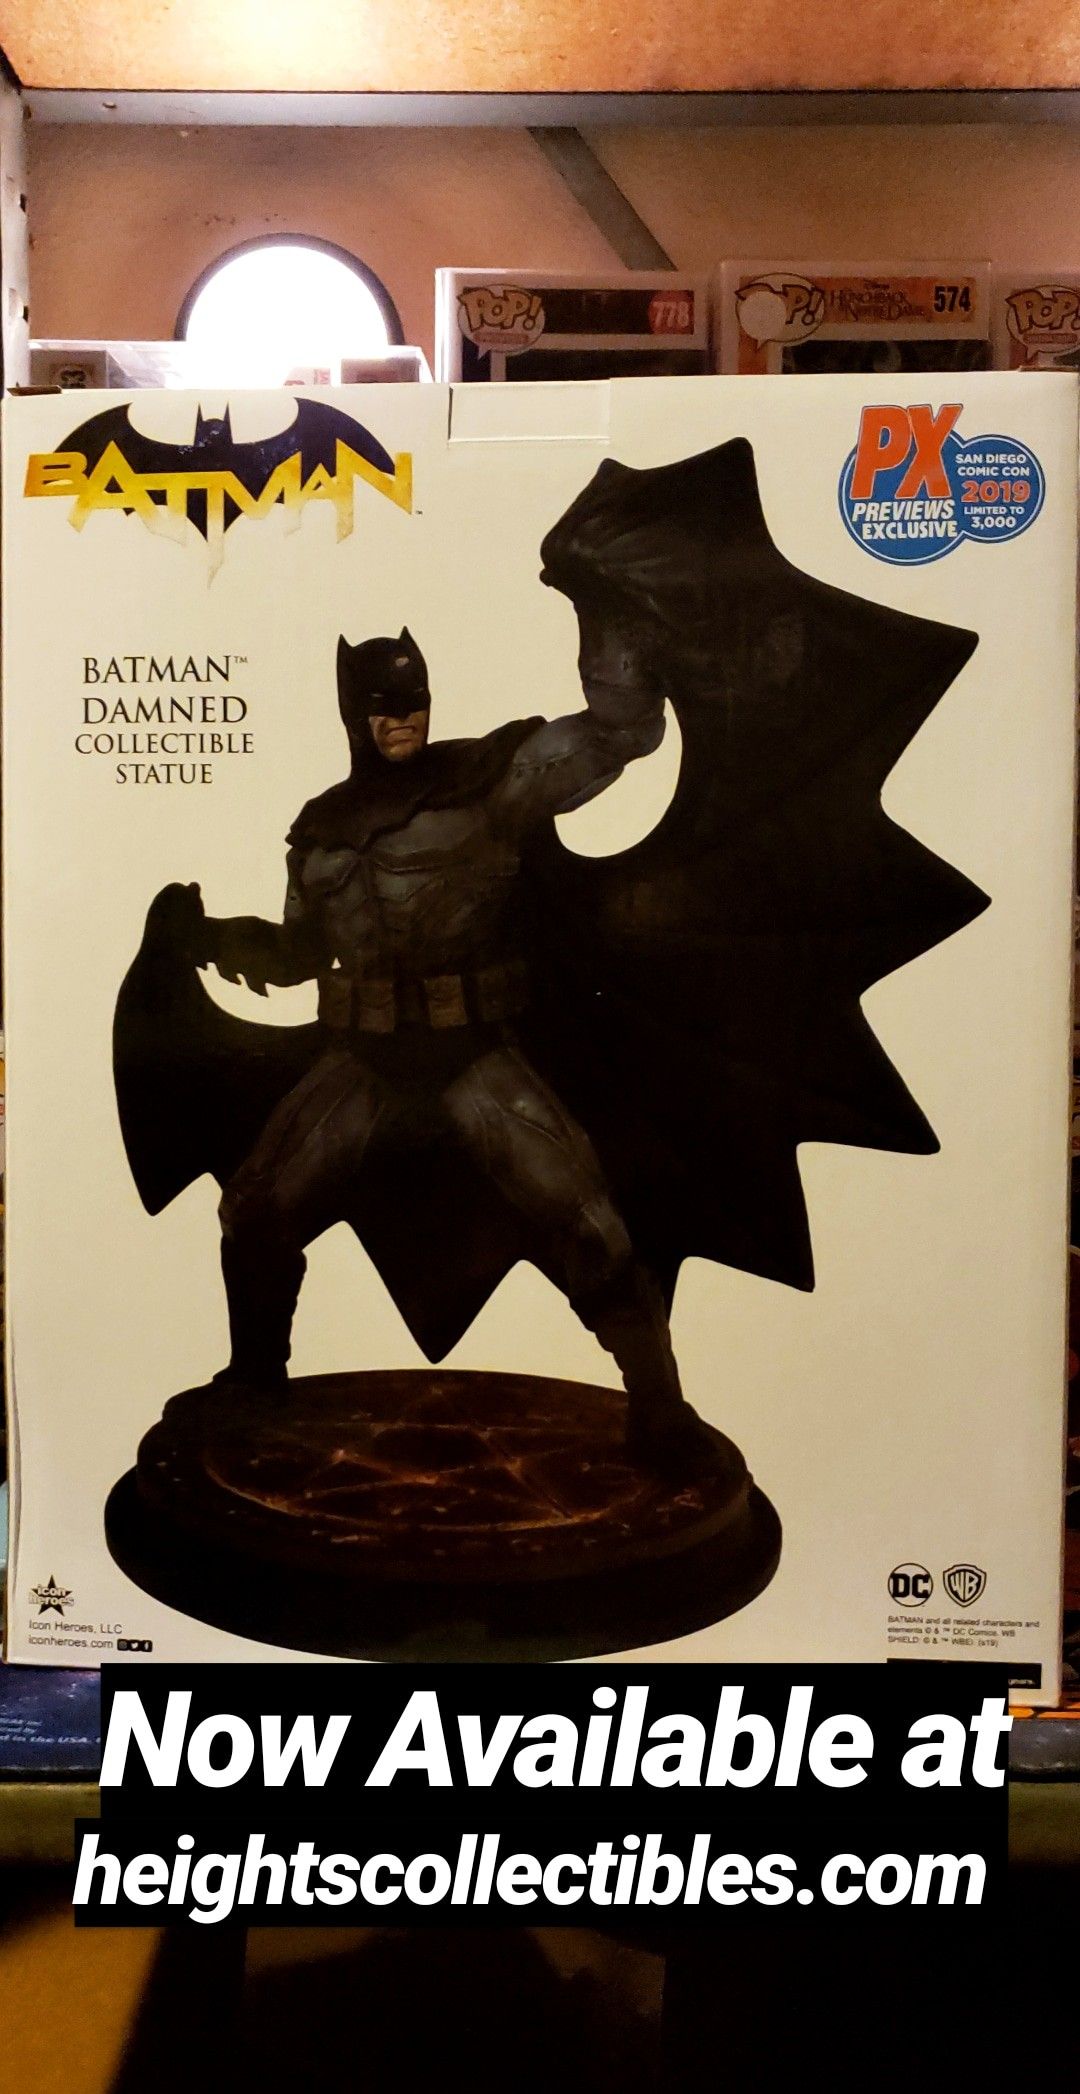 Batman Damned - (Collectible Statue) San Diego Comic Con 2019, PX Previews Exclusive Limited to 3,000